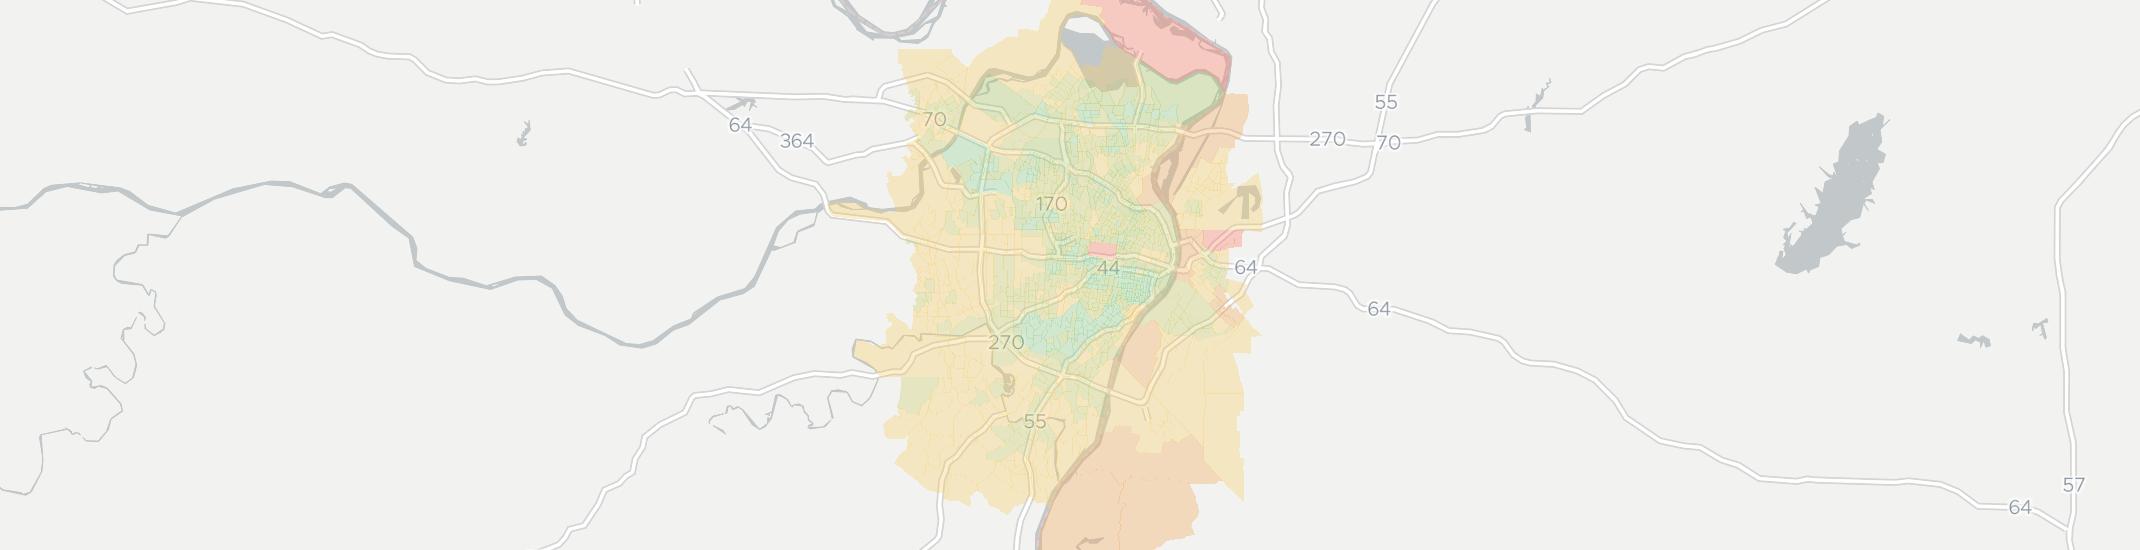 Saint Louis Internet Competition Map. Click for interactive map.